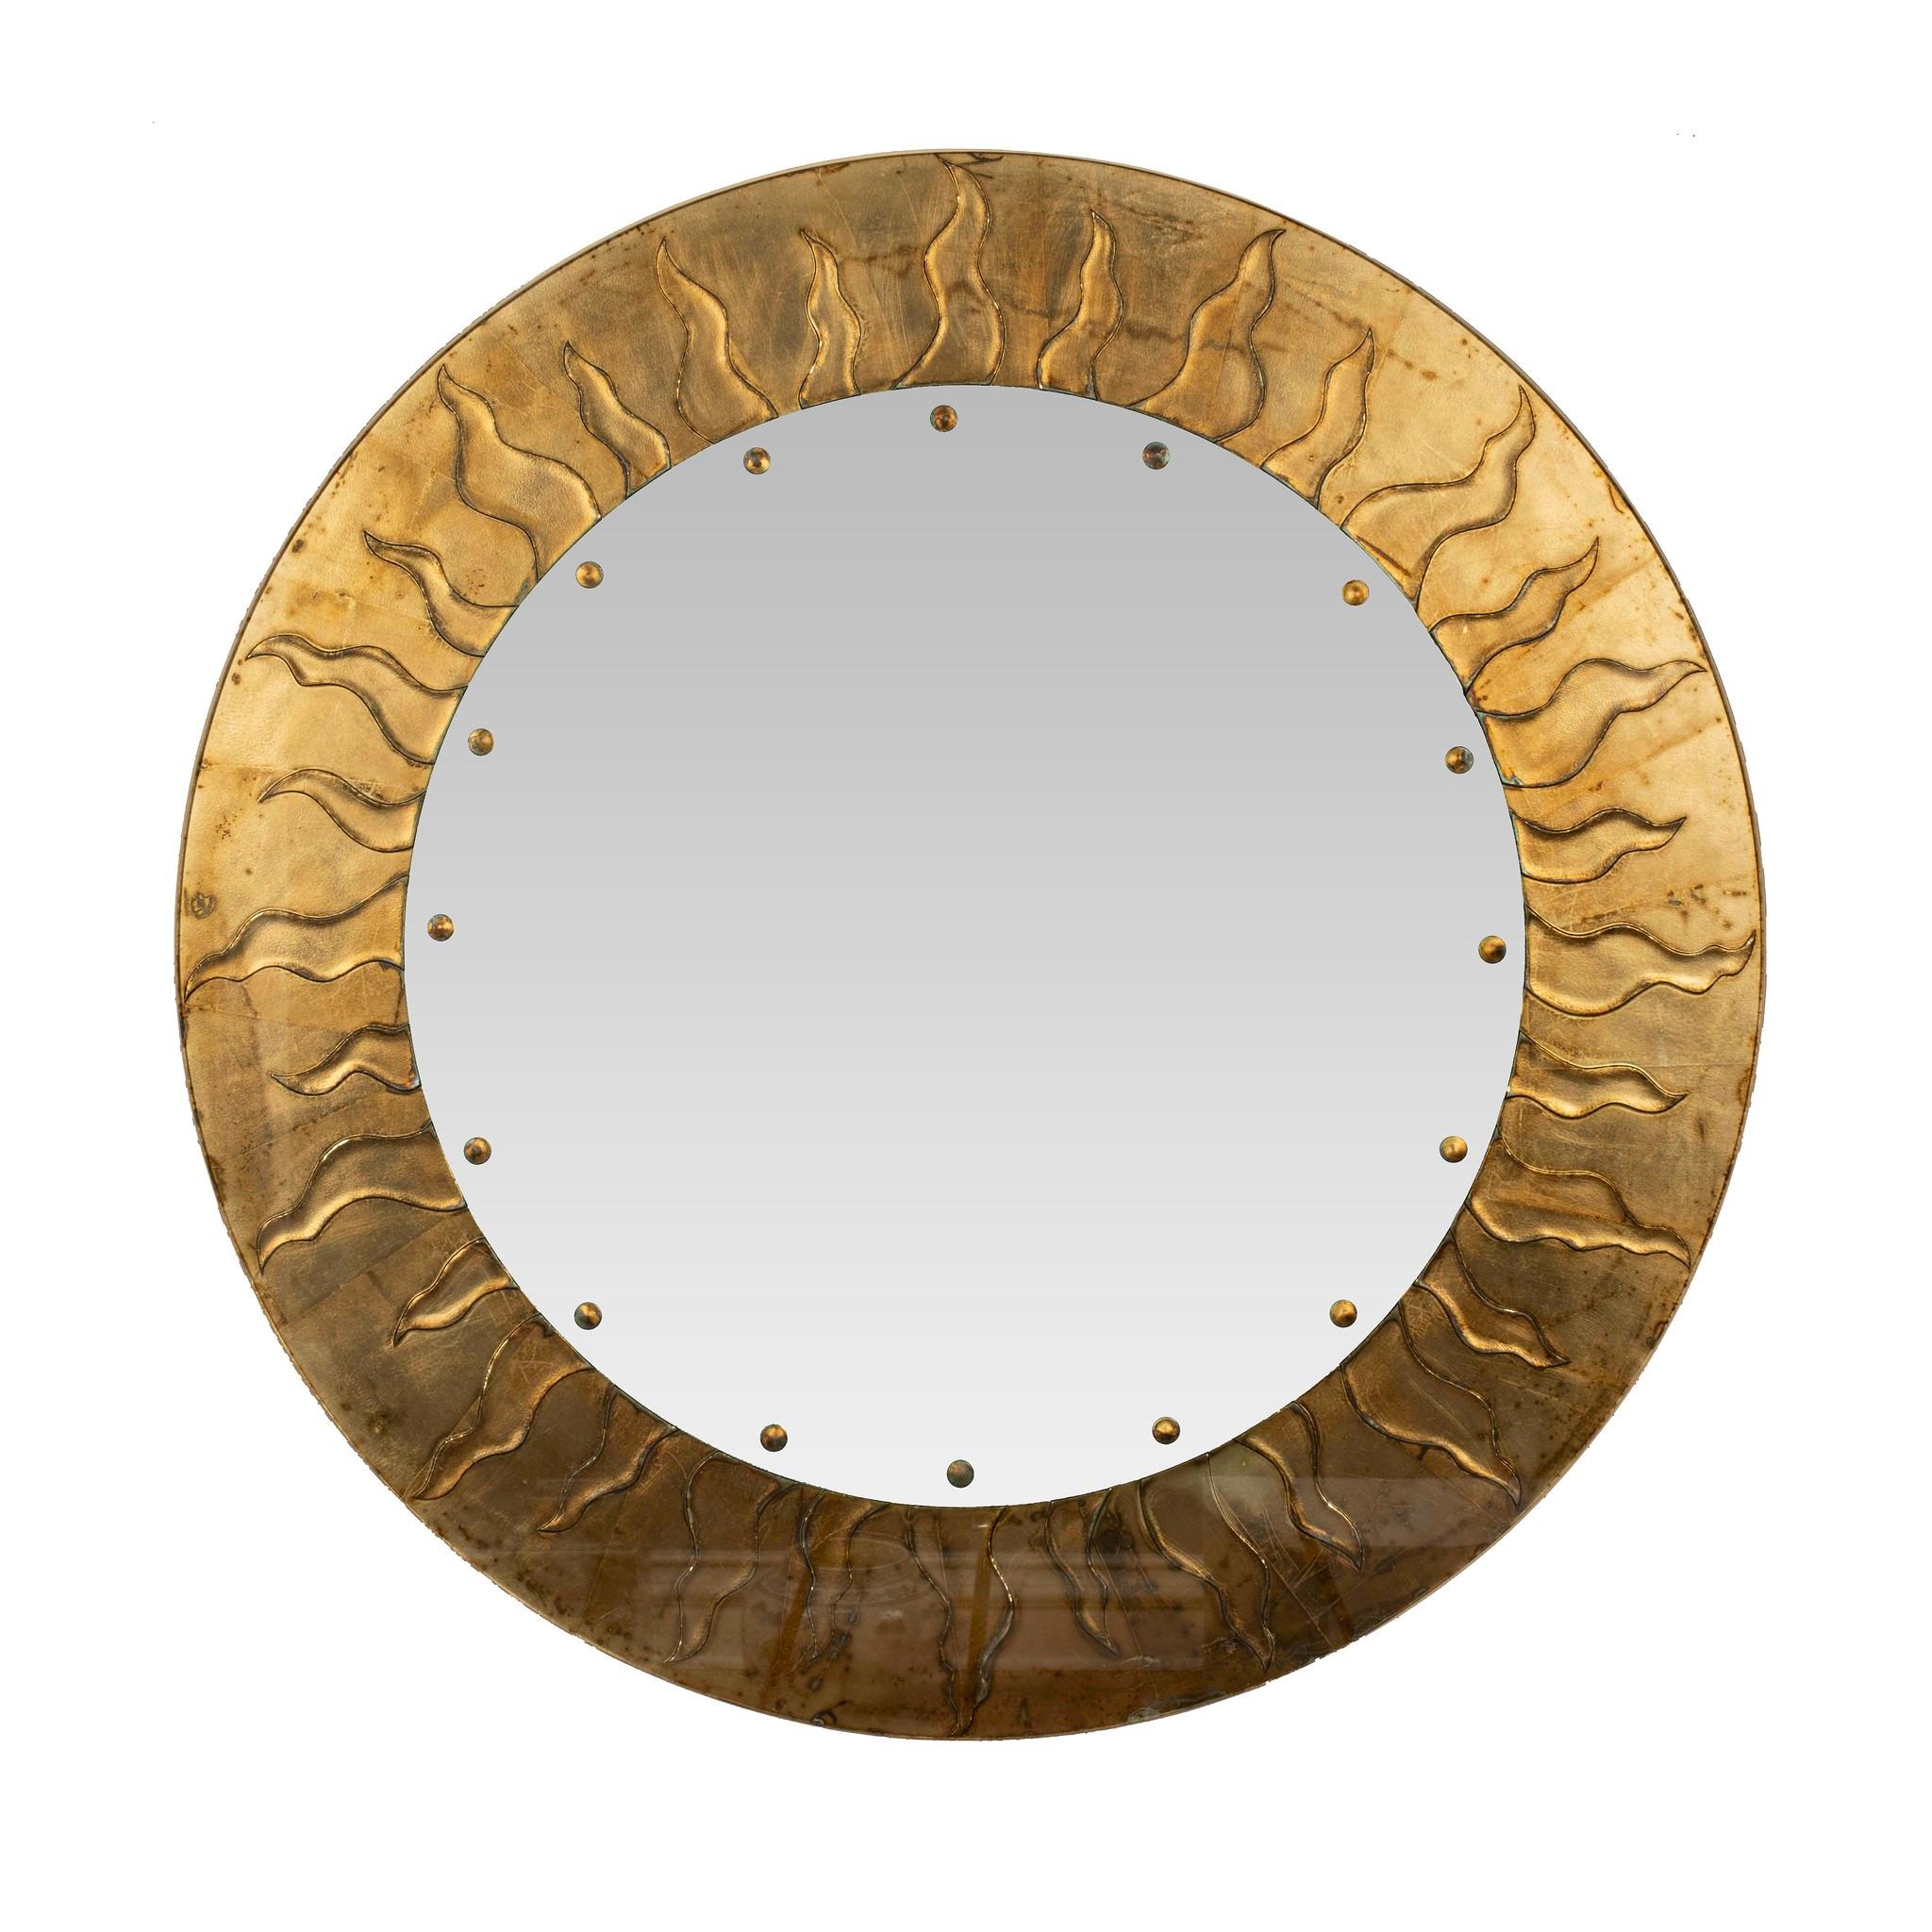 Chic Italian reverse gilt painted sunburst mirror. Signed by David Marshall. Two available, sold individually at $6800.00 each.